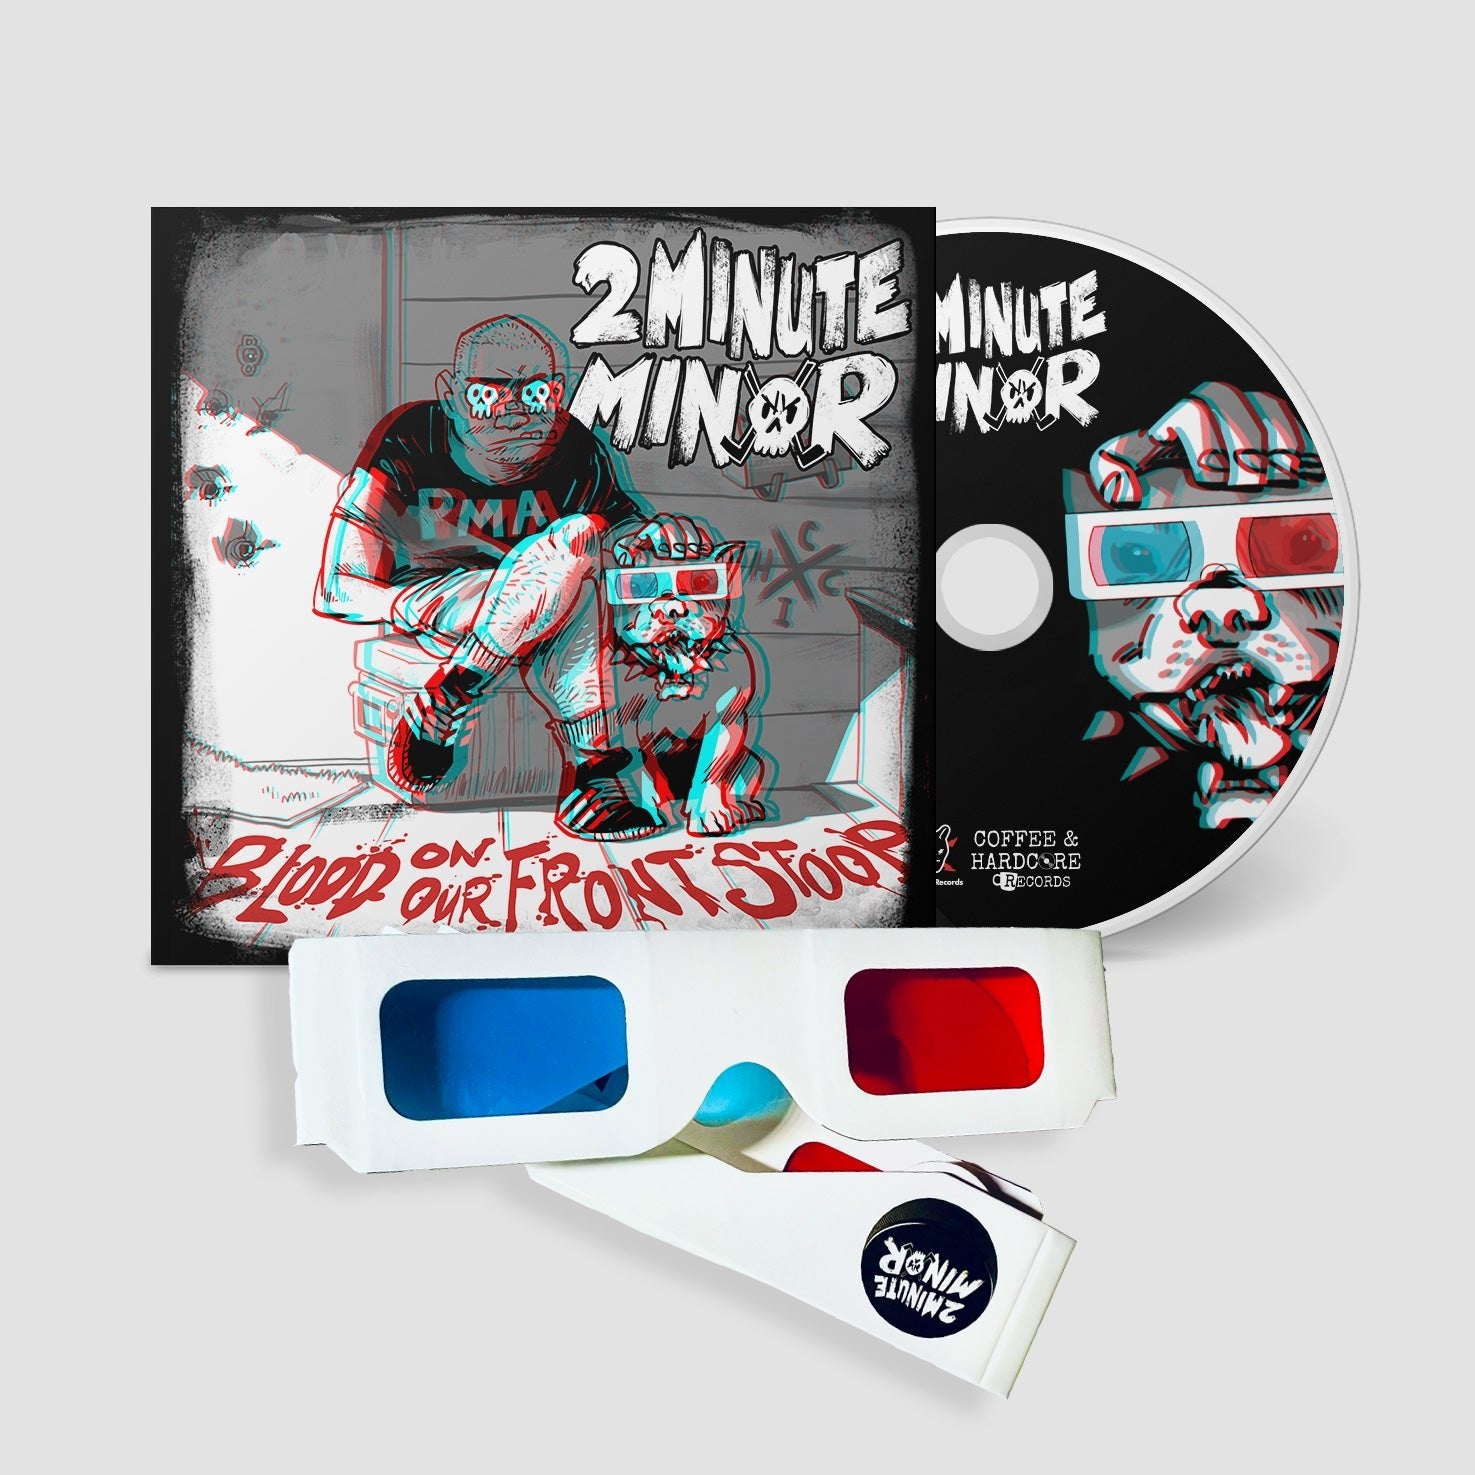 2Minute Minor: Blood On Our Front Stoop: 3D CD - Steadfast Records